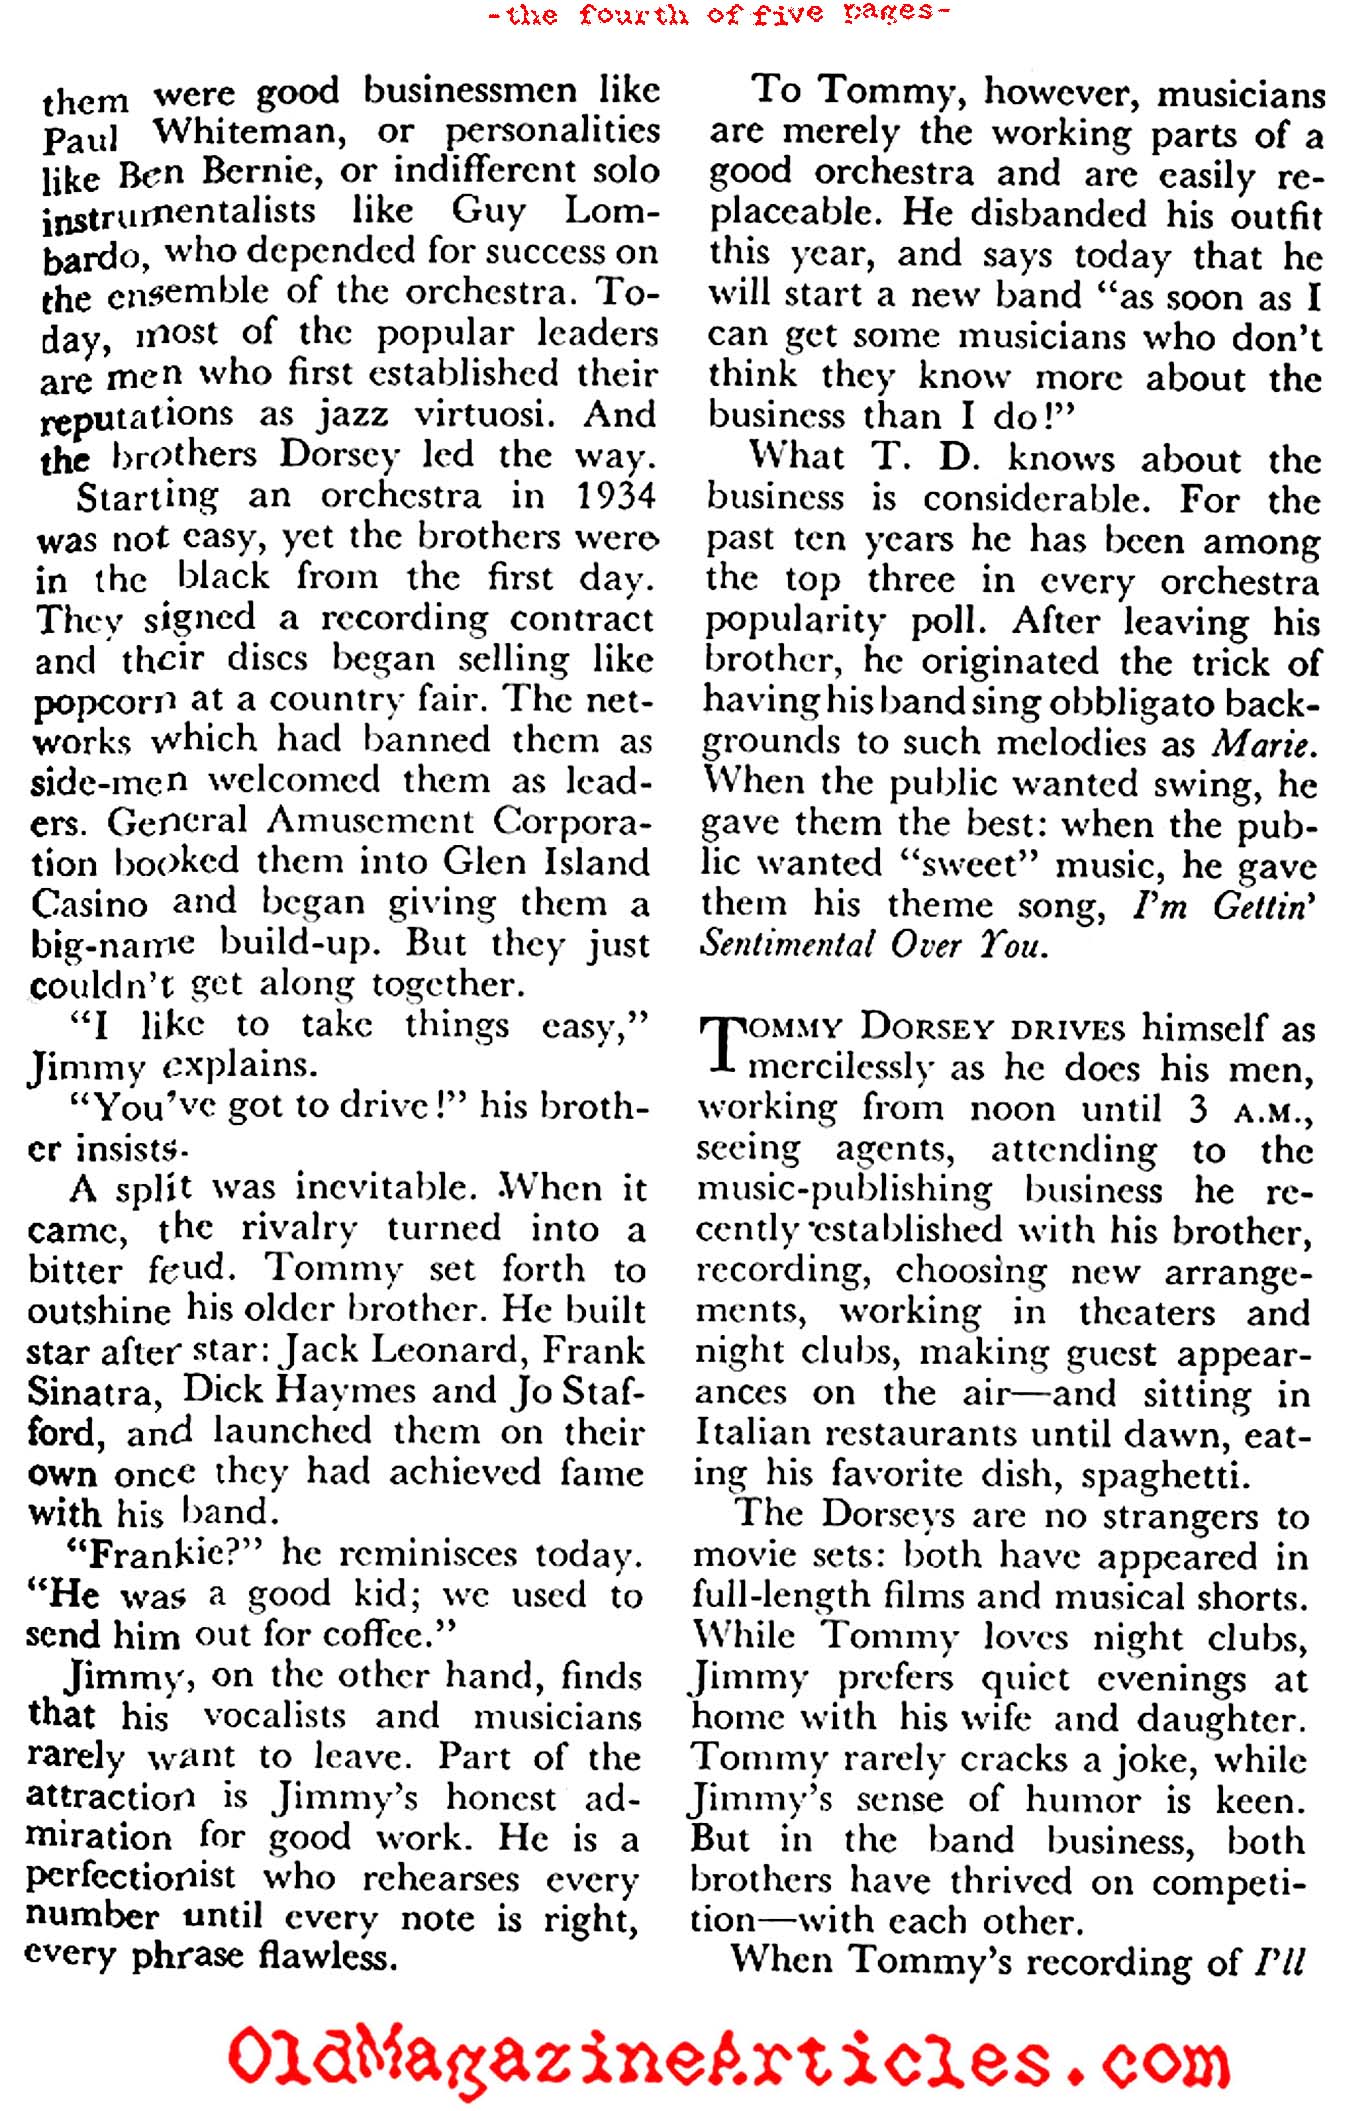 The Feuding Dorsey Brothers (Coronet Magazine, 1947)